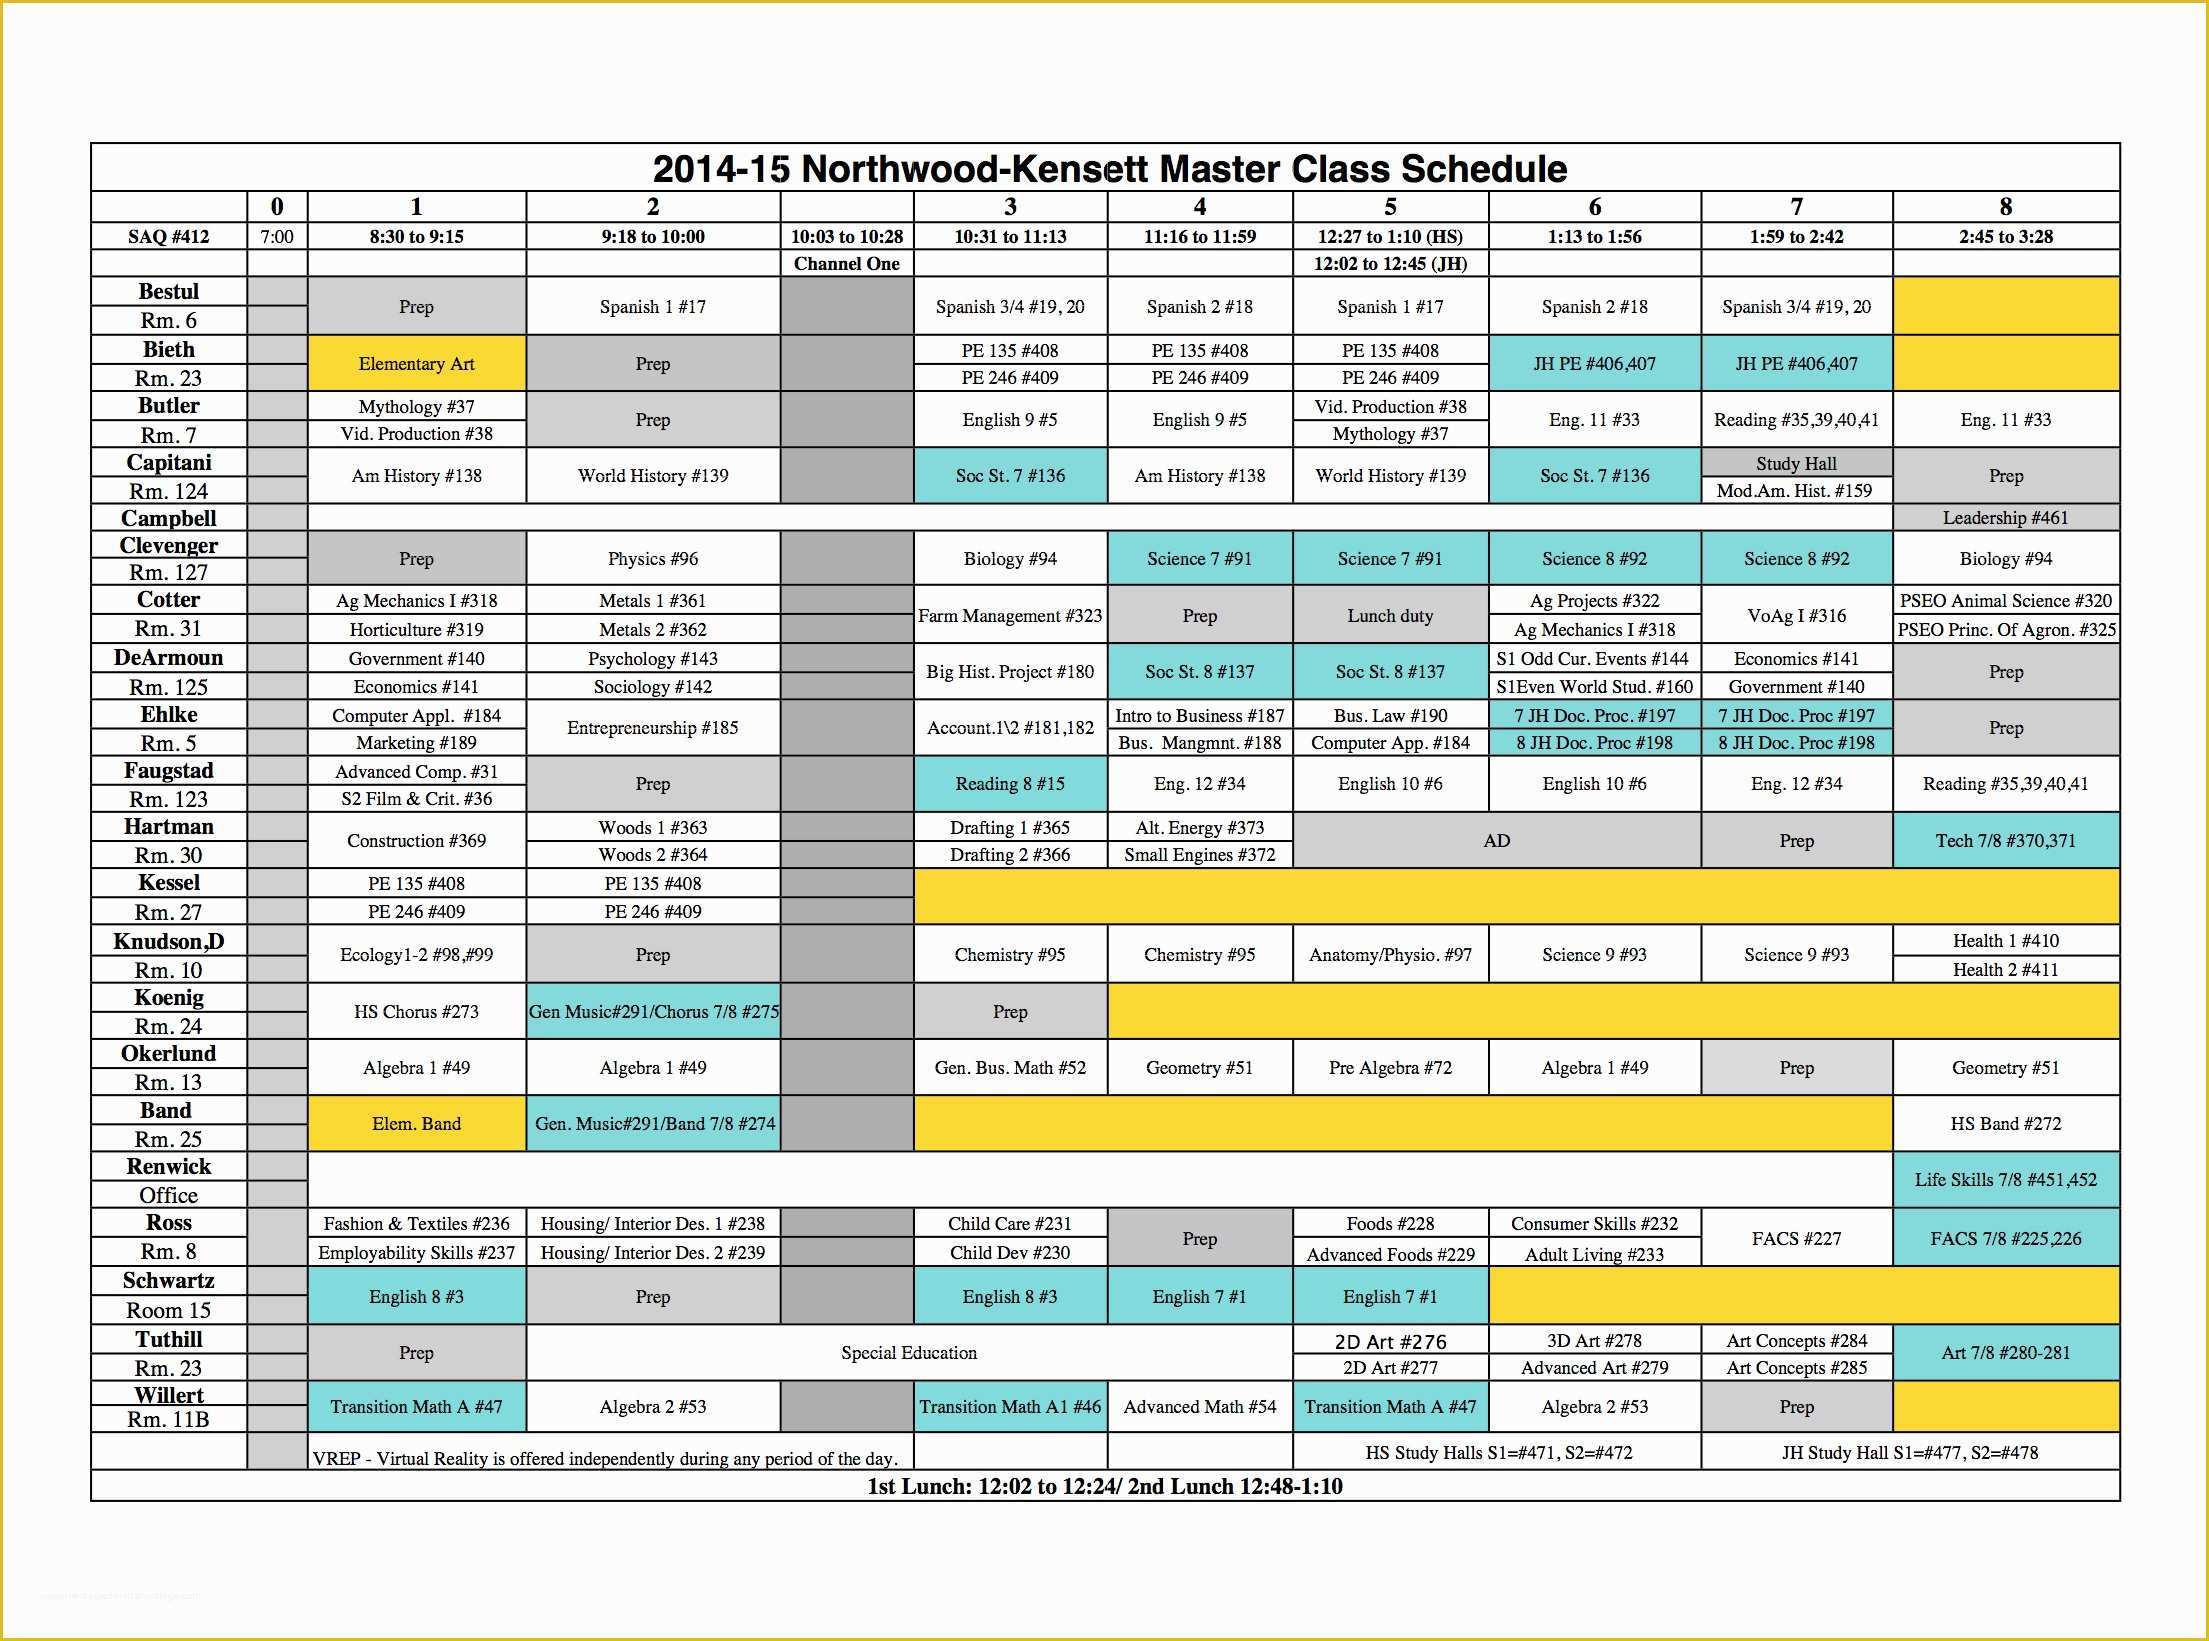 Free School Master Schedule Template Of northwood Kensett 2015 2016 Course Book and Schedule